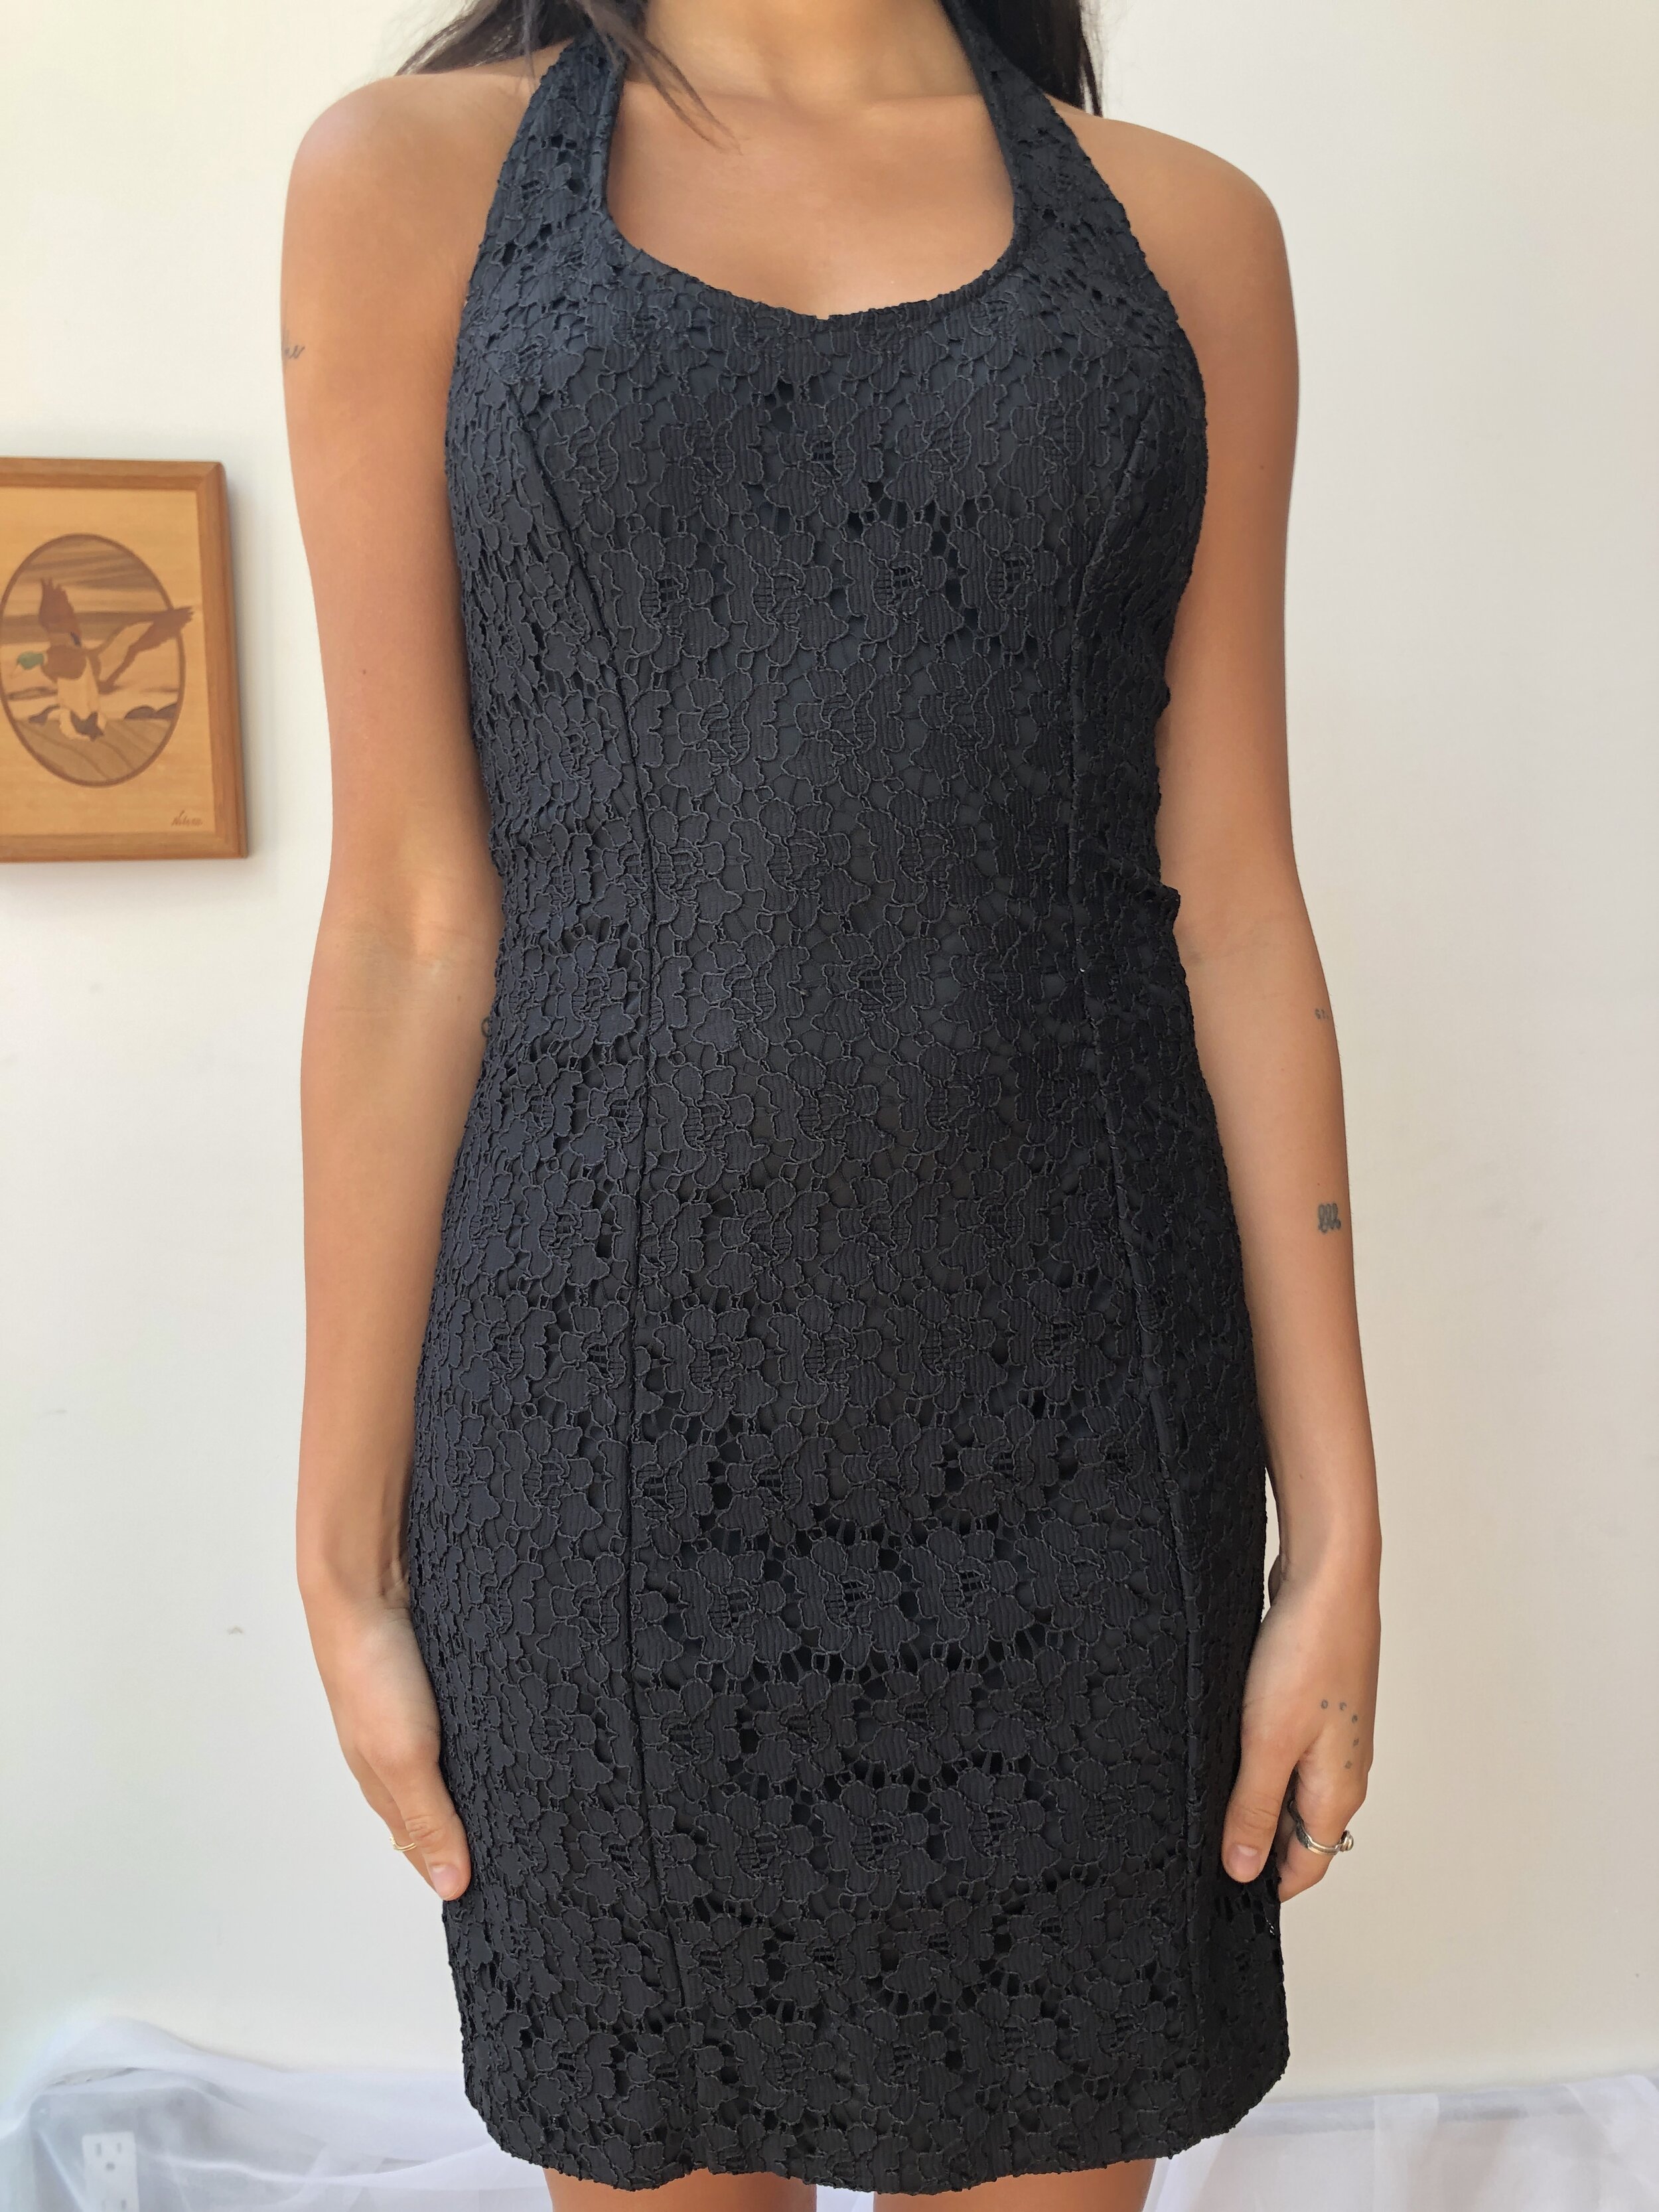 Bronze and Black Late 90s Lace bodycon dress